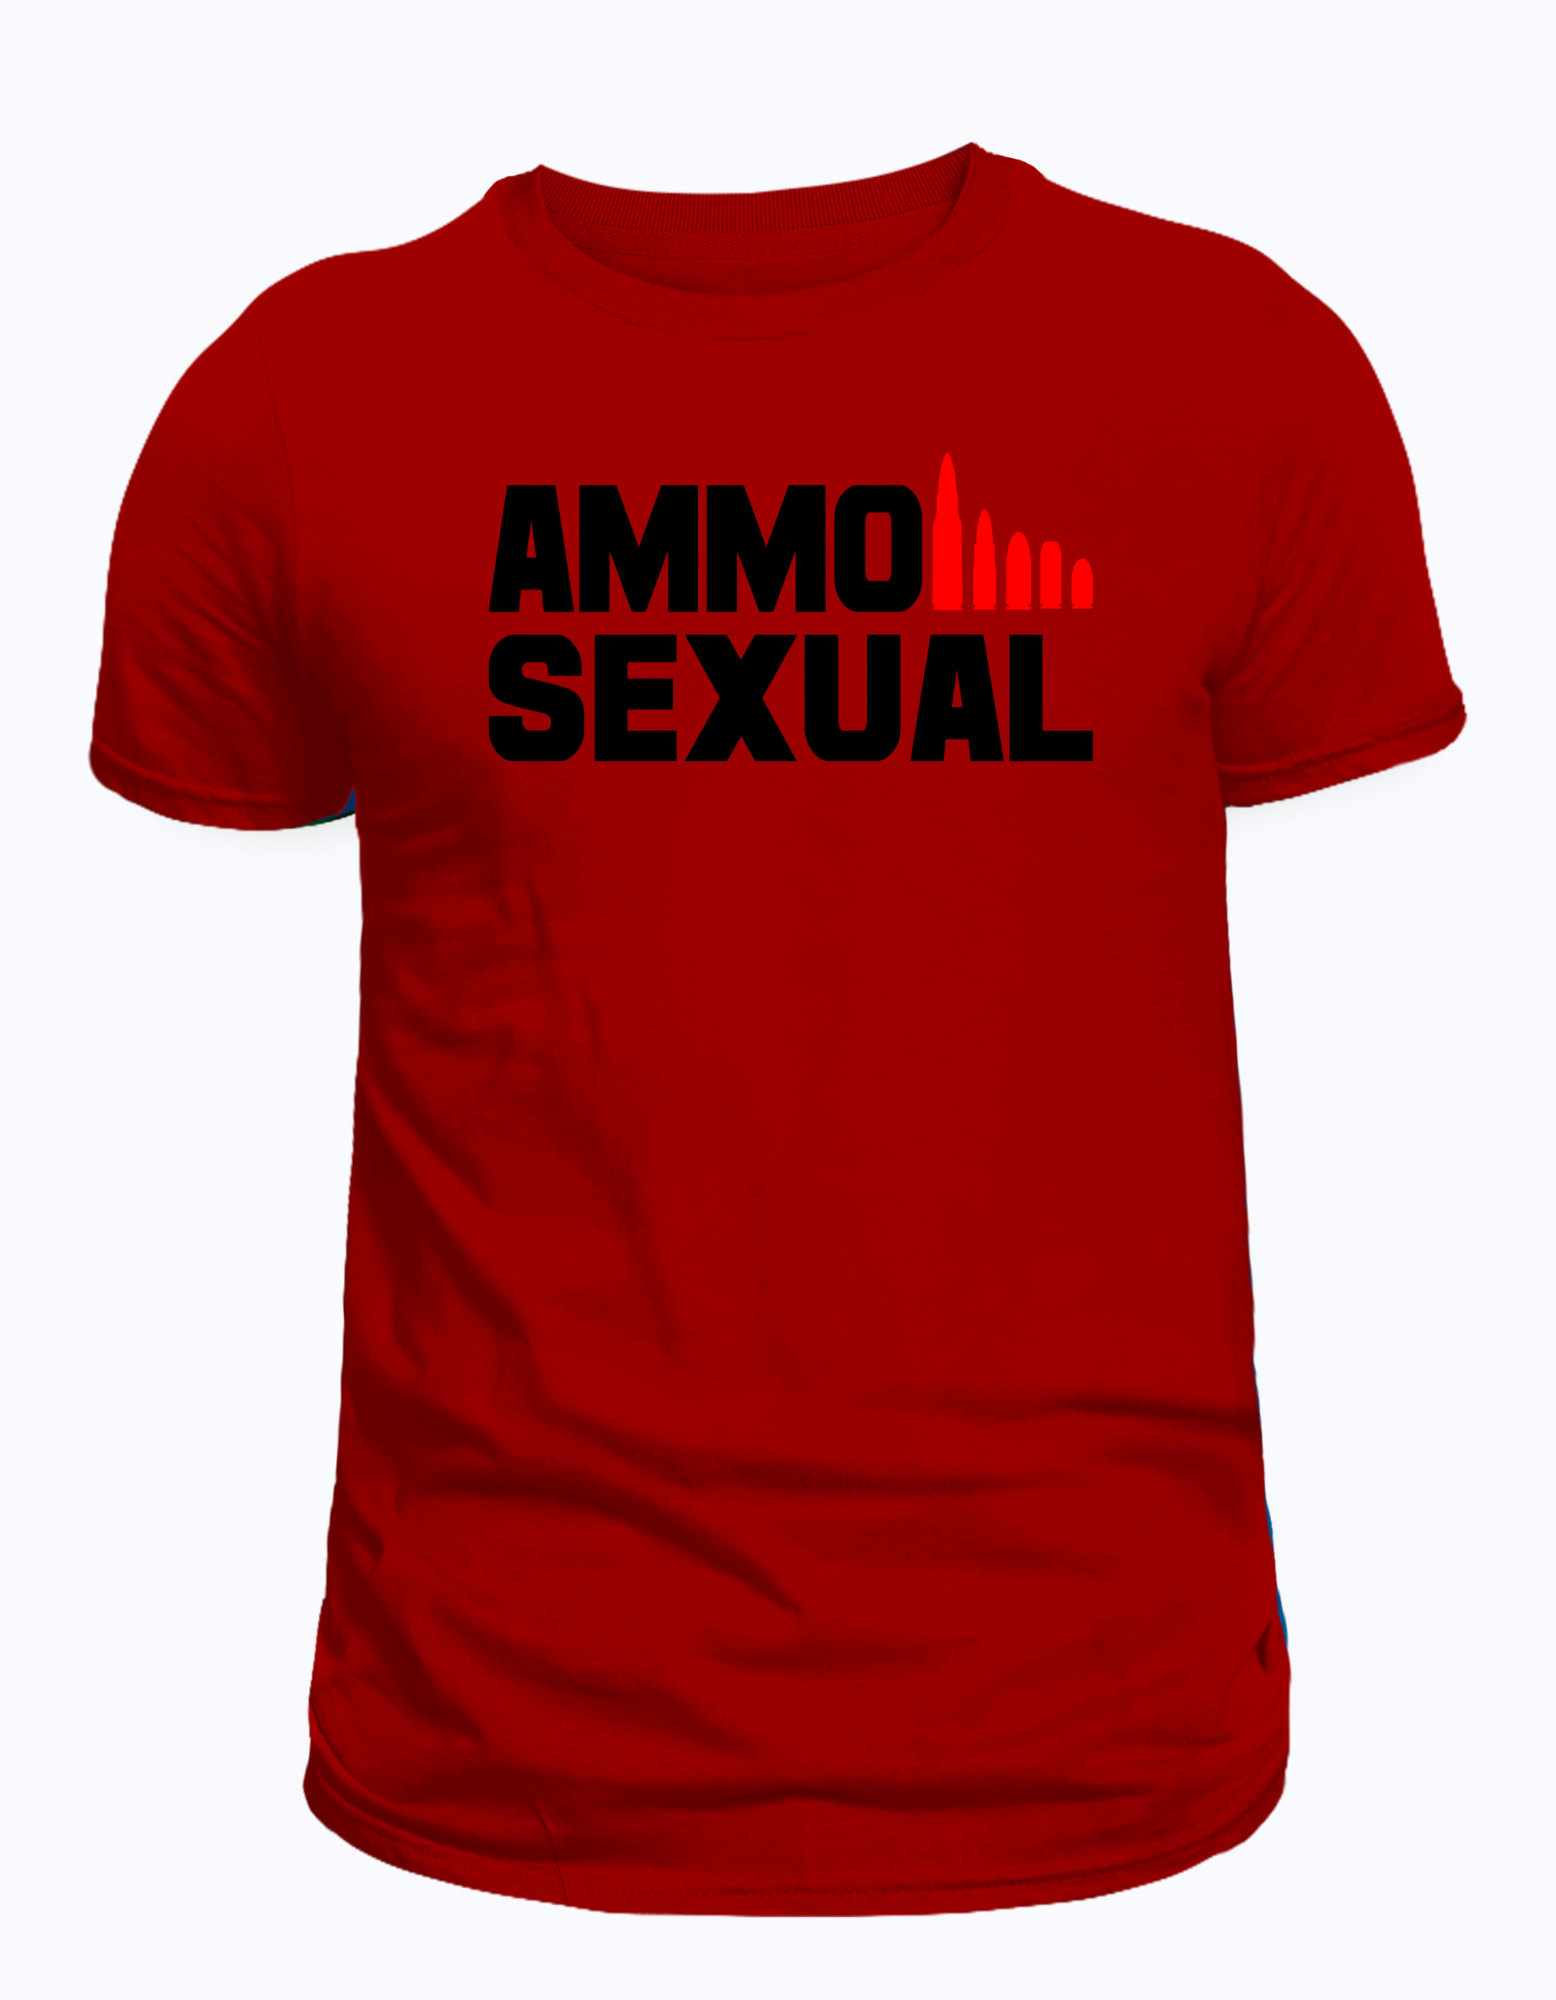 Ammo Sexual T-Shirt